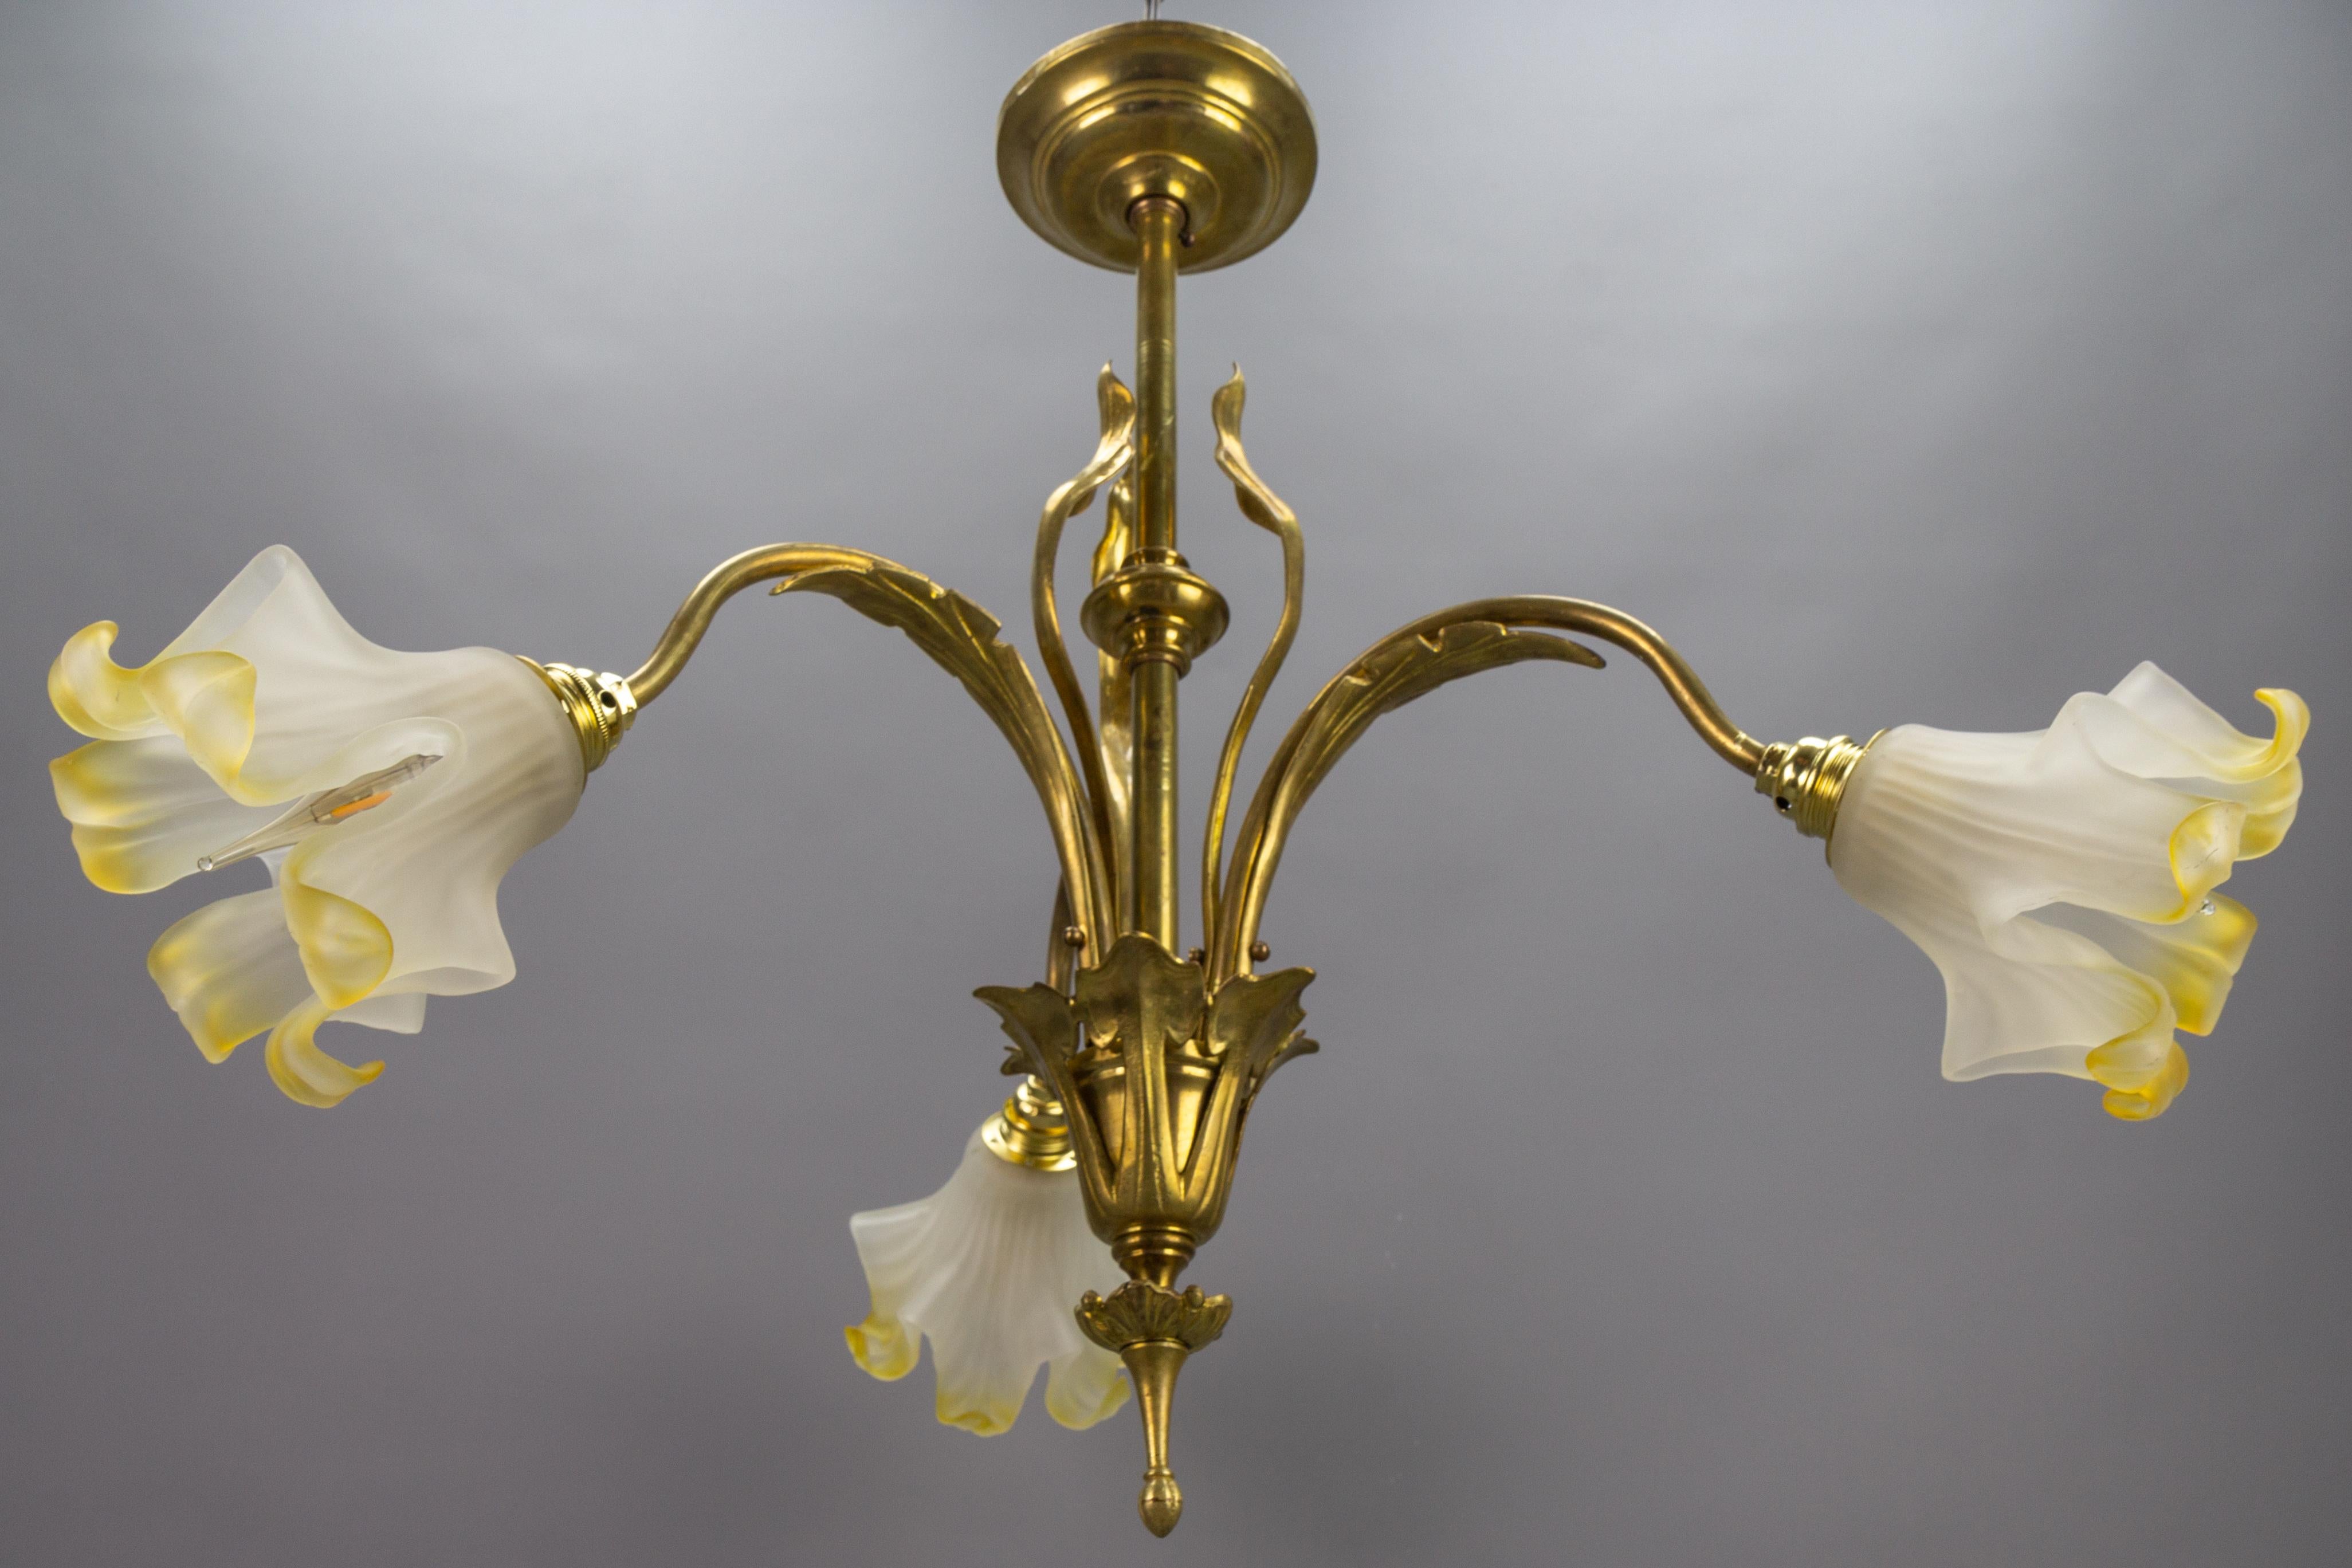 French Art Nouveau Brass and Glass Three-Light Iris-Shaped Chandelier, ca. 1910 For Sale 5